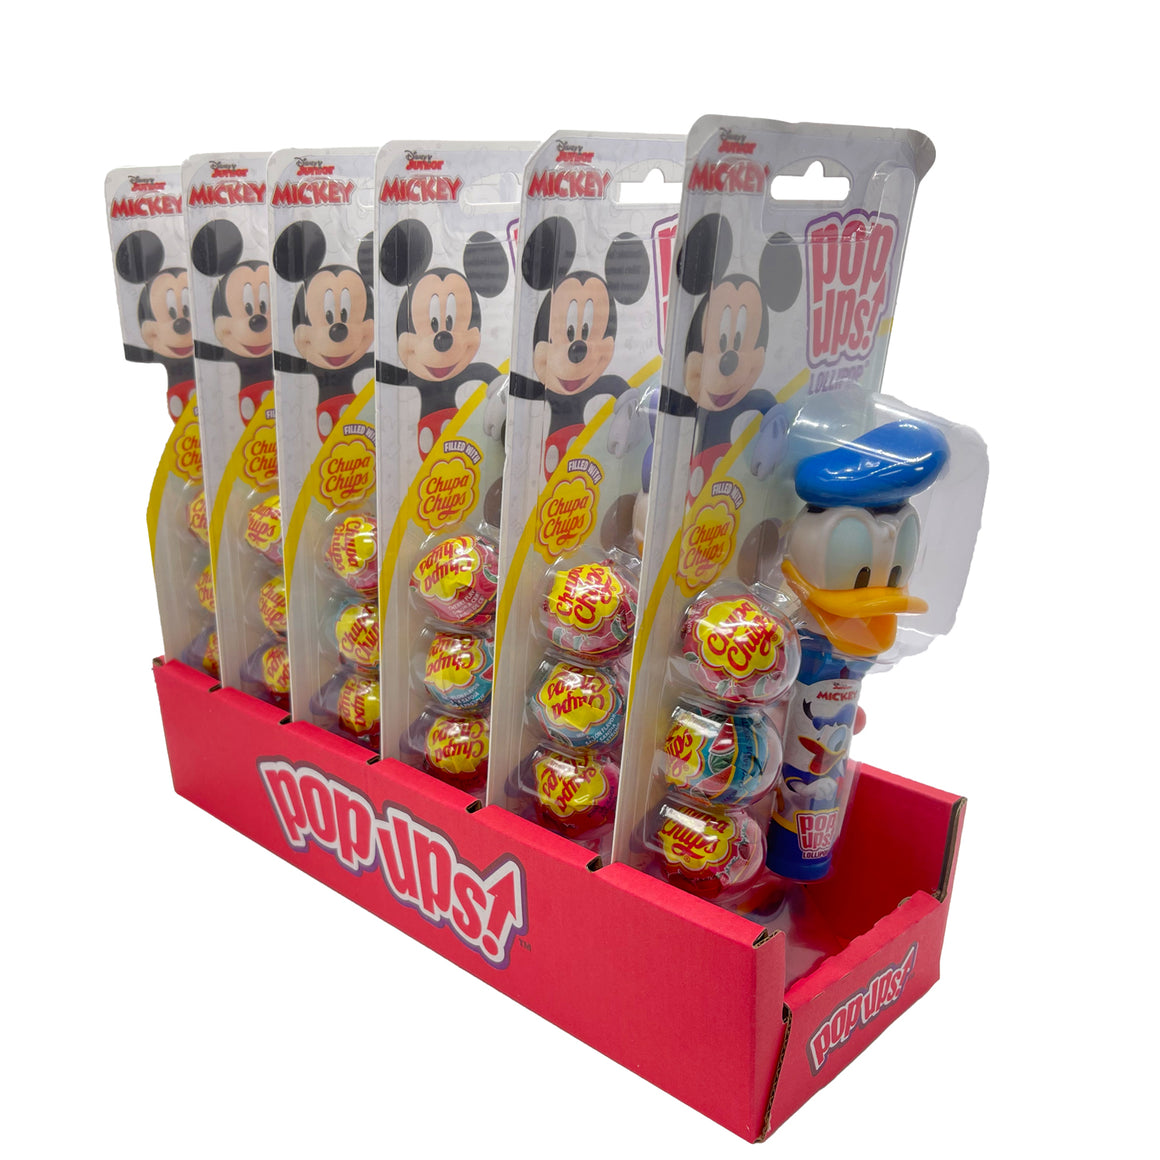 All City Candy Flix Pop ups! Disney Junior Mickey & Friends Blister Card 1.26 oz. Mickey Mouse Novelty Flix Candy For fresh candy and great service, visit www.allcitycandy.com